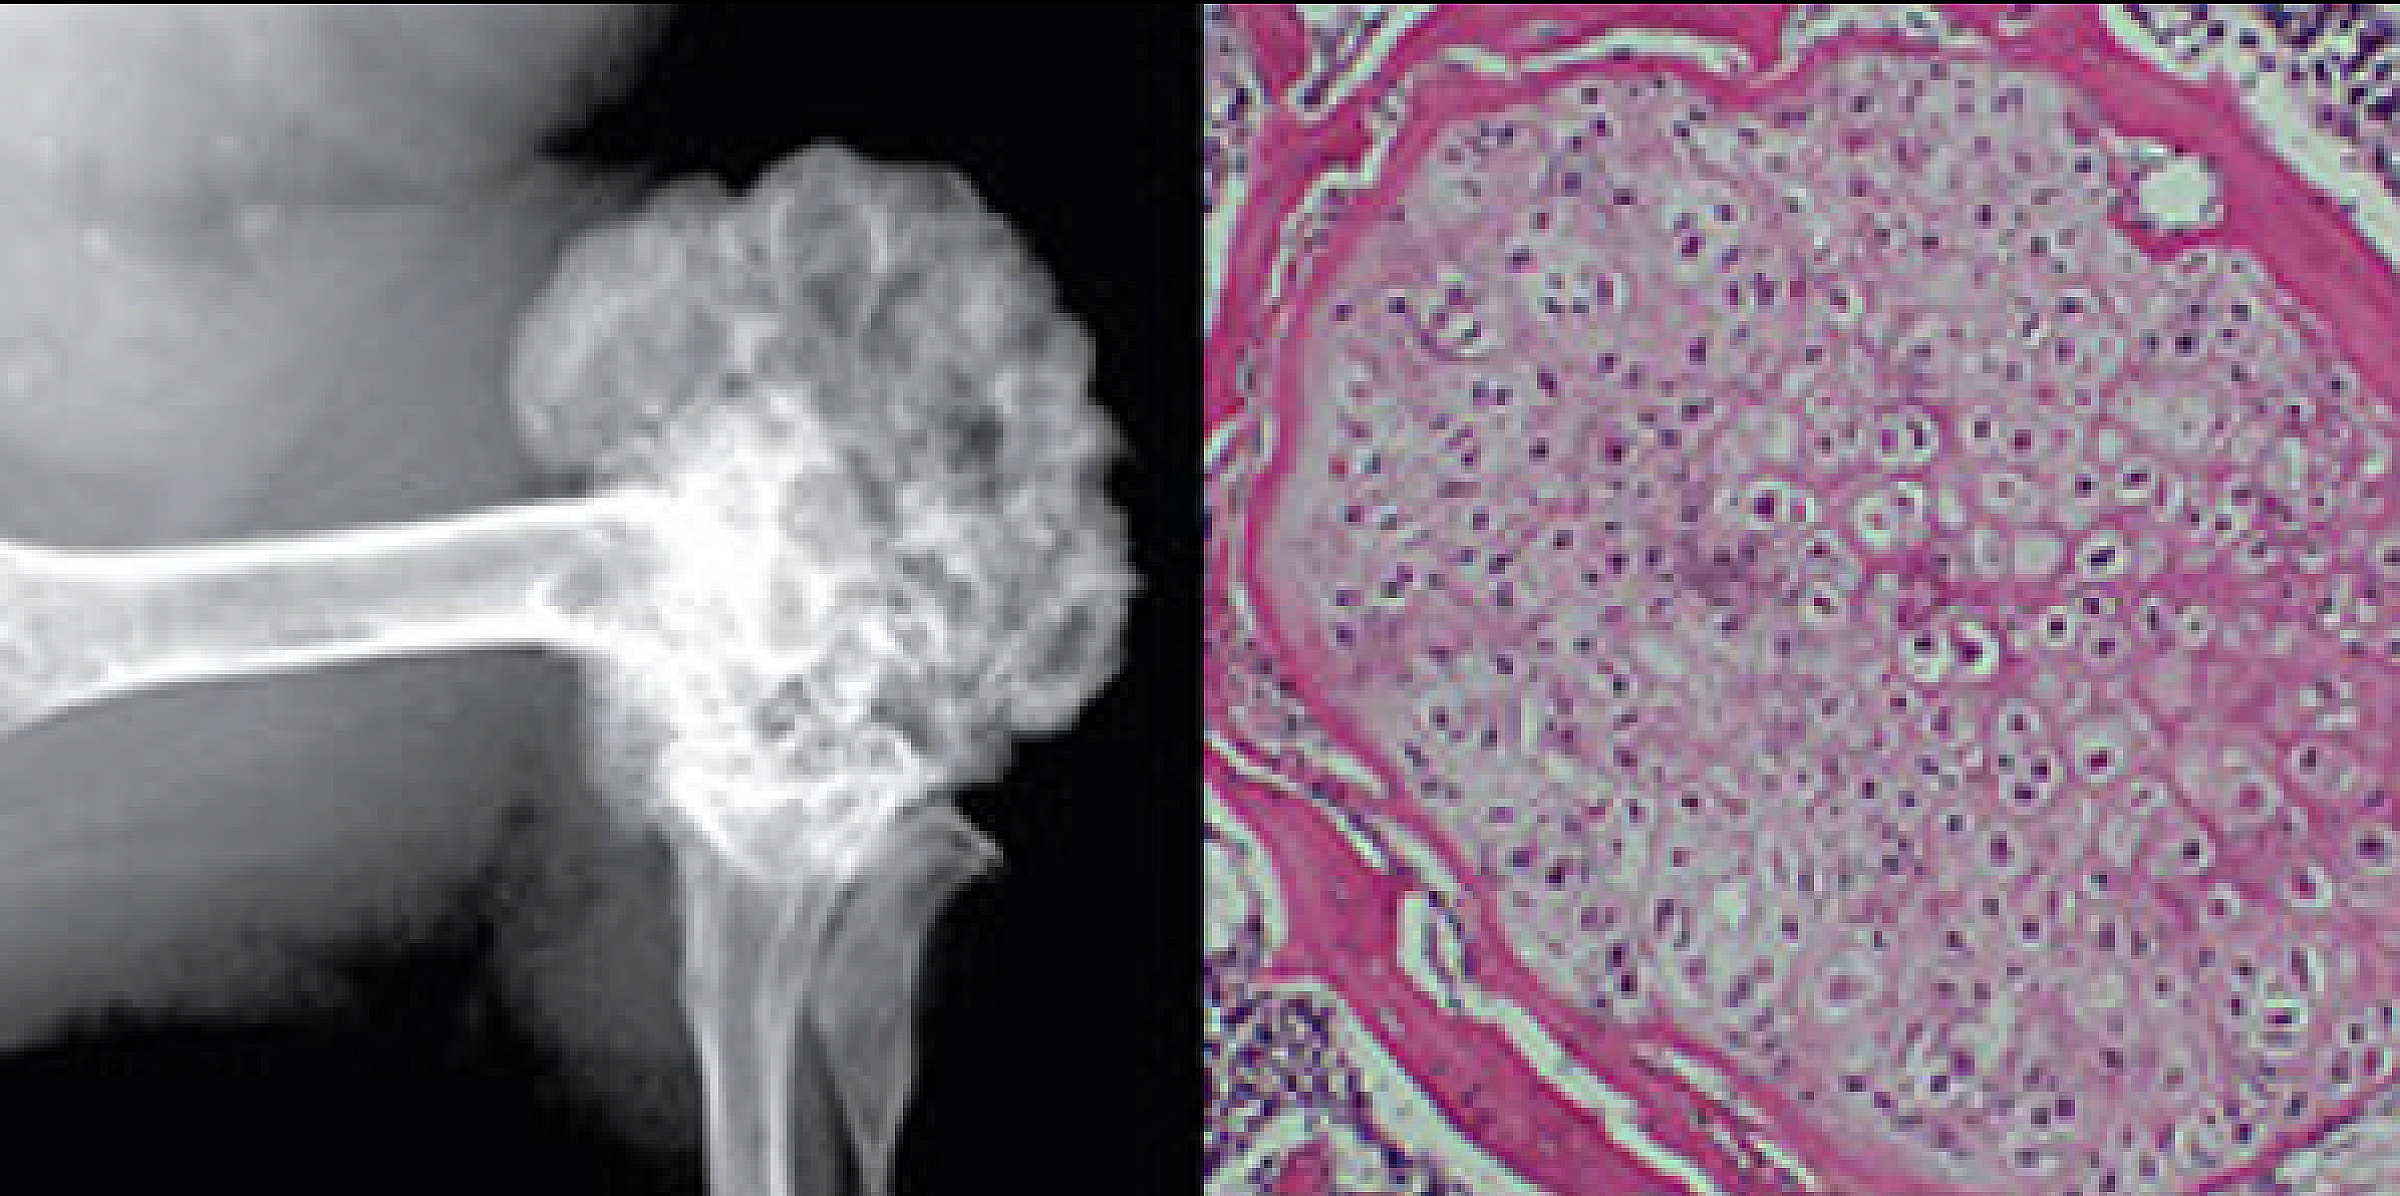 The peripheral chondrosarcoma seen just above the knee to the right was genetically induced by silencing the Ext1 gene in chondrocytes in the mouse.